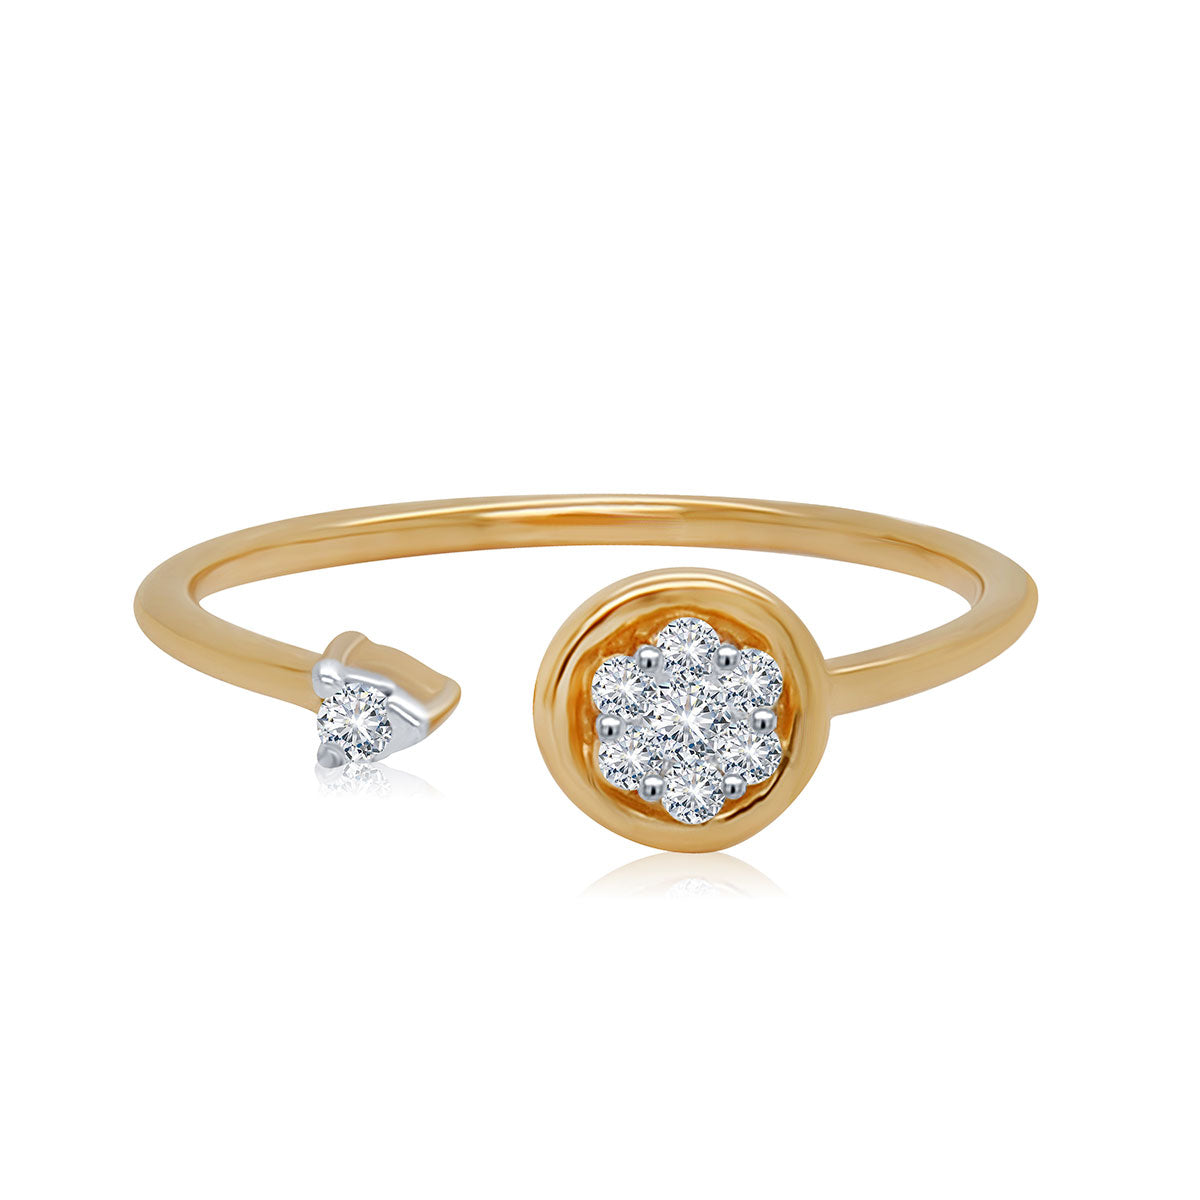 Tanishq Gold and Diamond Finger Ring Price Starting From Rs 17,990/Unit |  Find Verified Sellers at Justdial